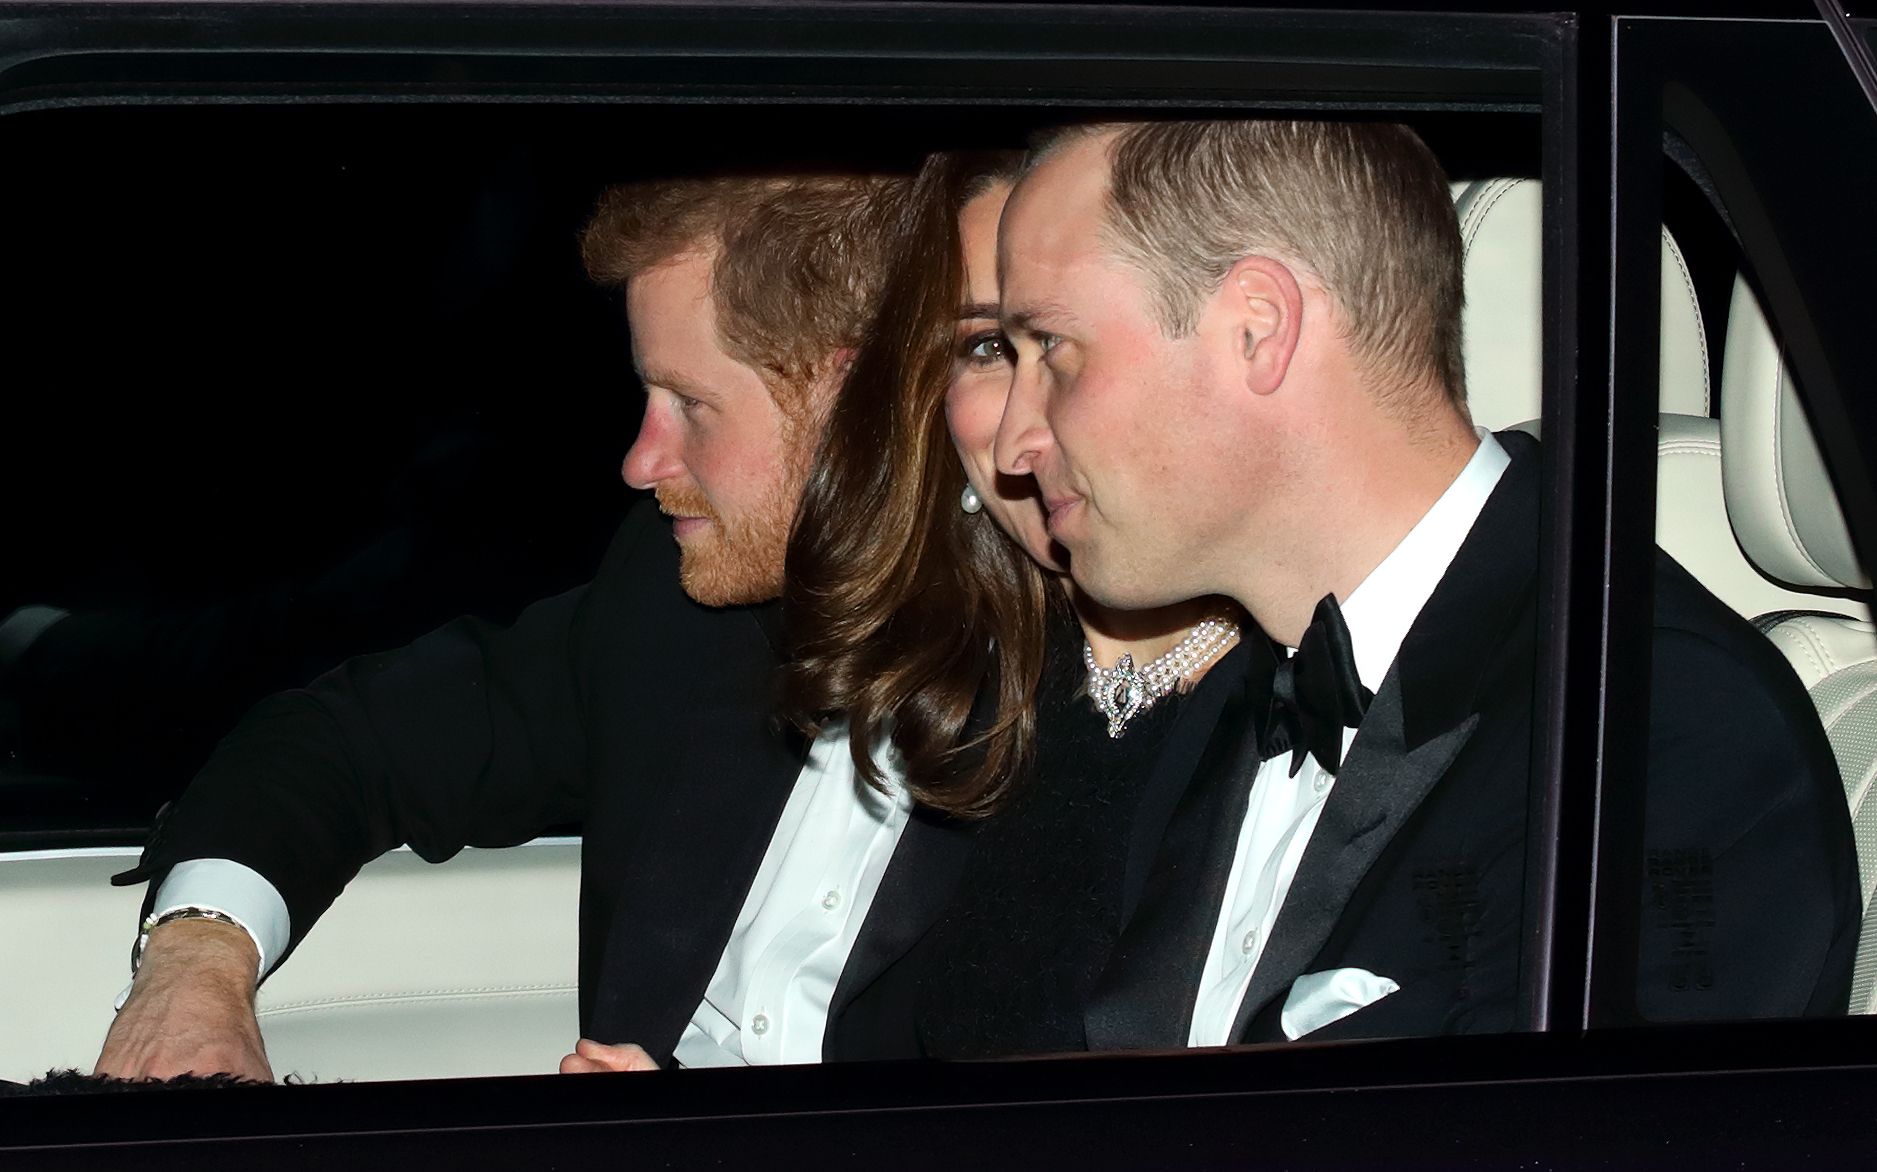 PHOTO: Prince Harry, Catherine, Duchess of Cambridge and Prince William, Duke of Cambridge arrive at Windsor Castle to attend Queen Elizabeth II's and Prince Philip, Duke of Edinburgh's 70th wedding anniversary dinner, Nov. 20, 2017, in Windsor, England. 